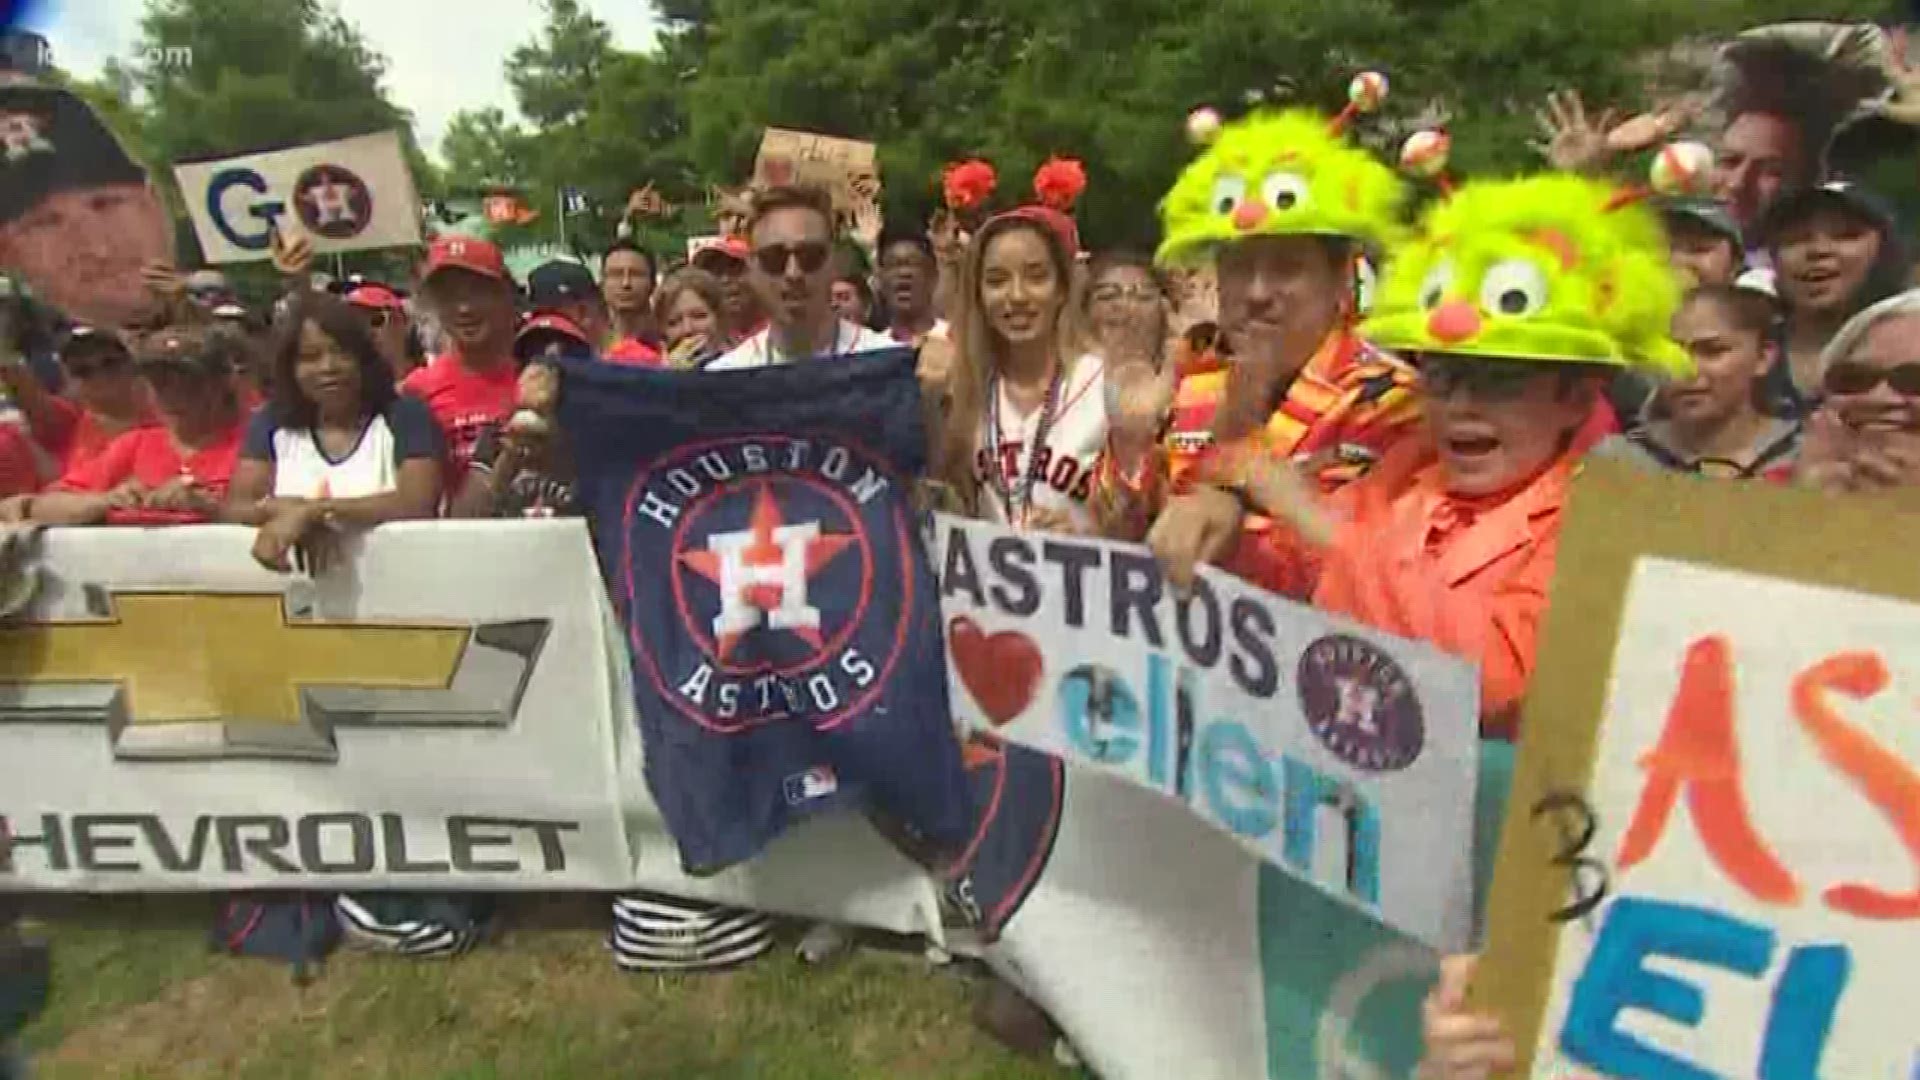 Astros fans formed long lines around Minute Maid Park for their chance to appear on "The Ellen Show".